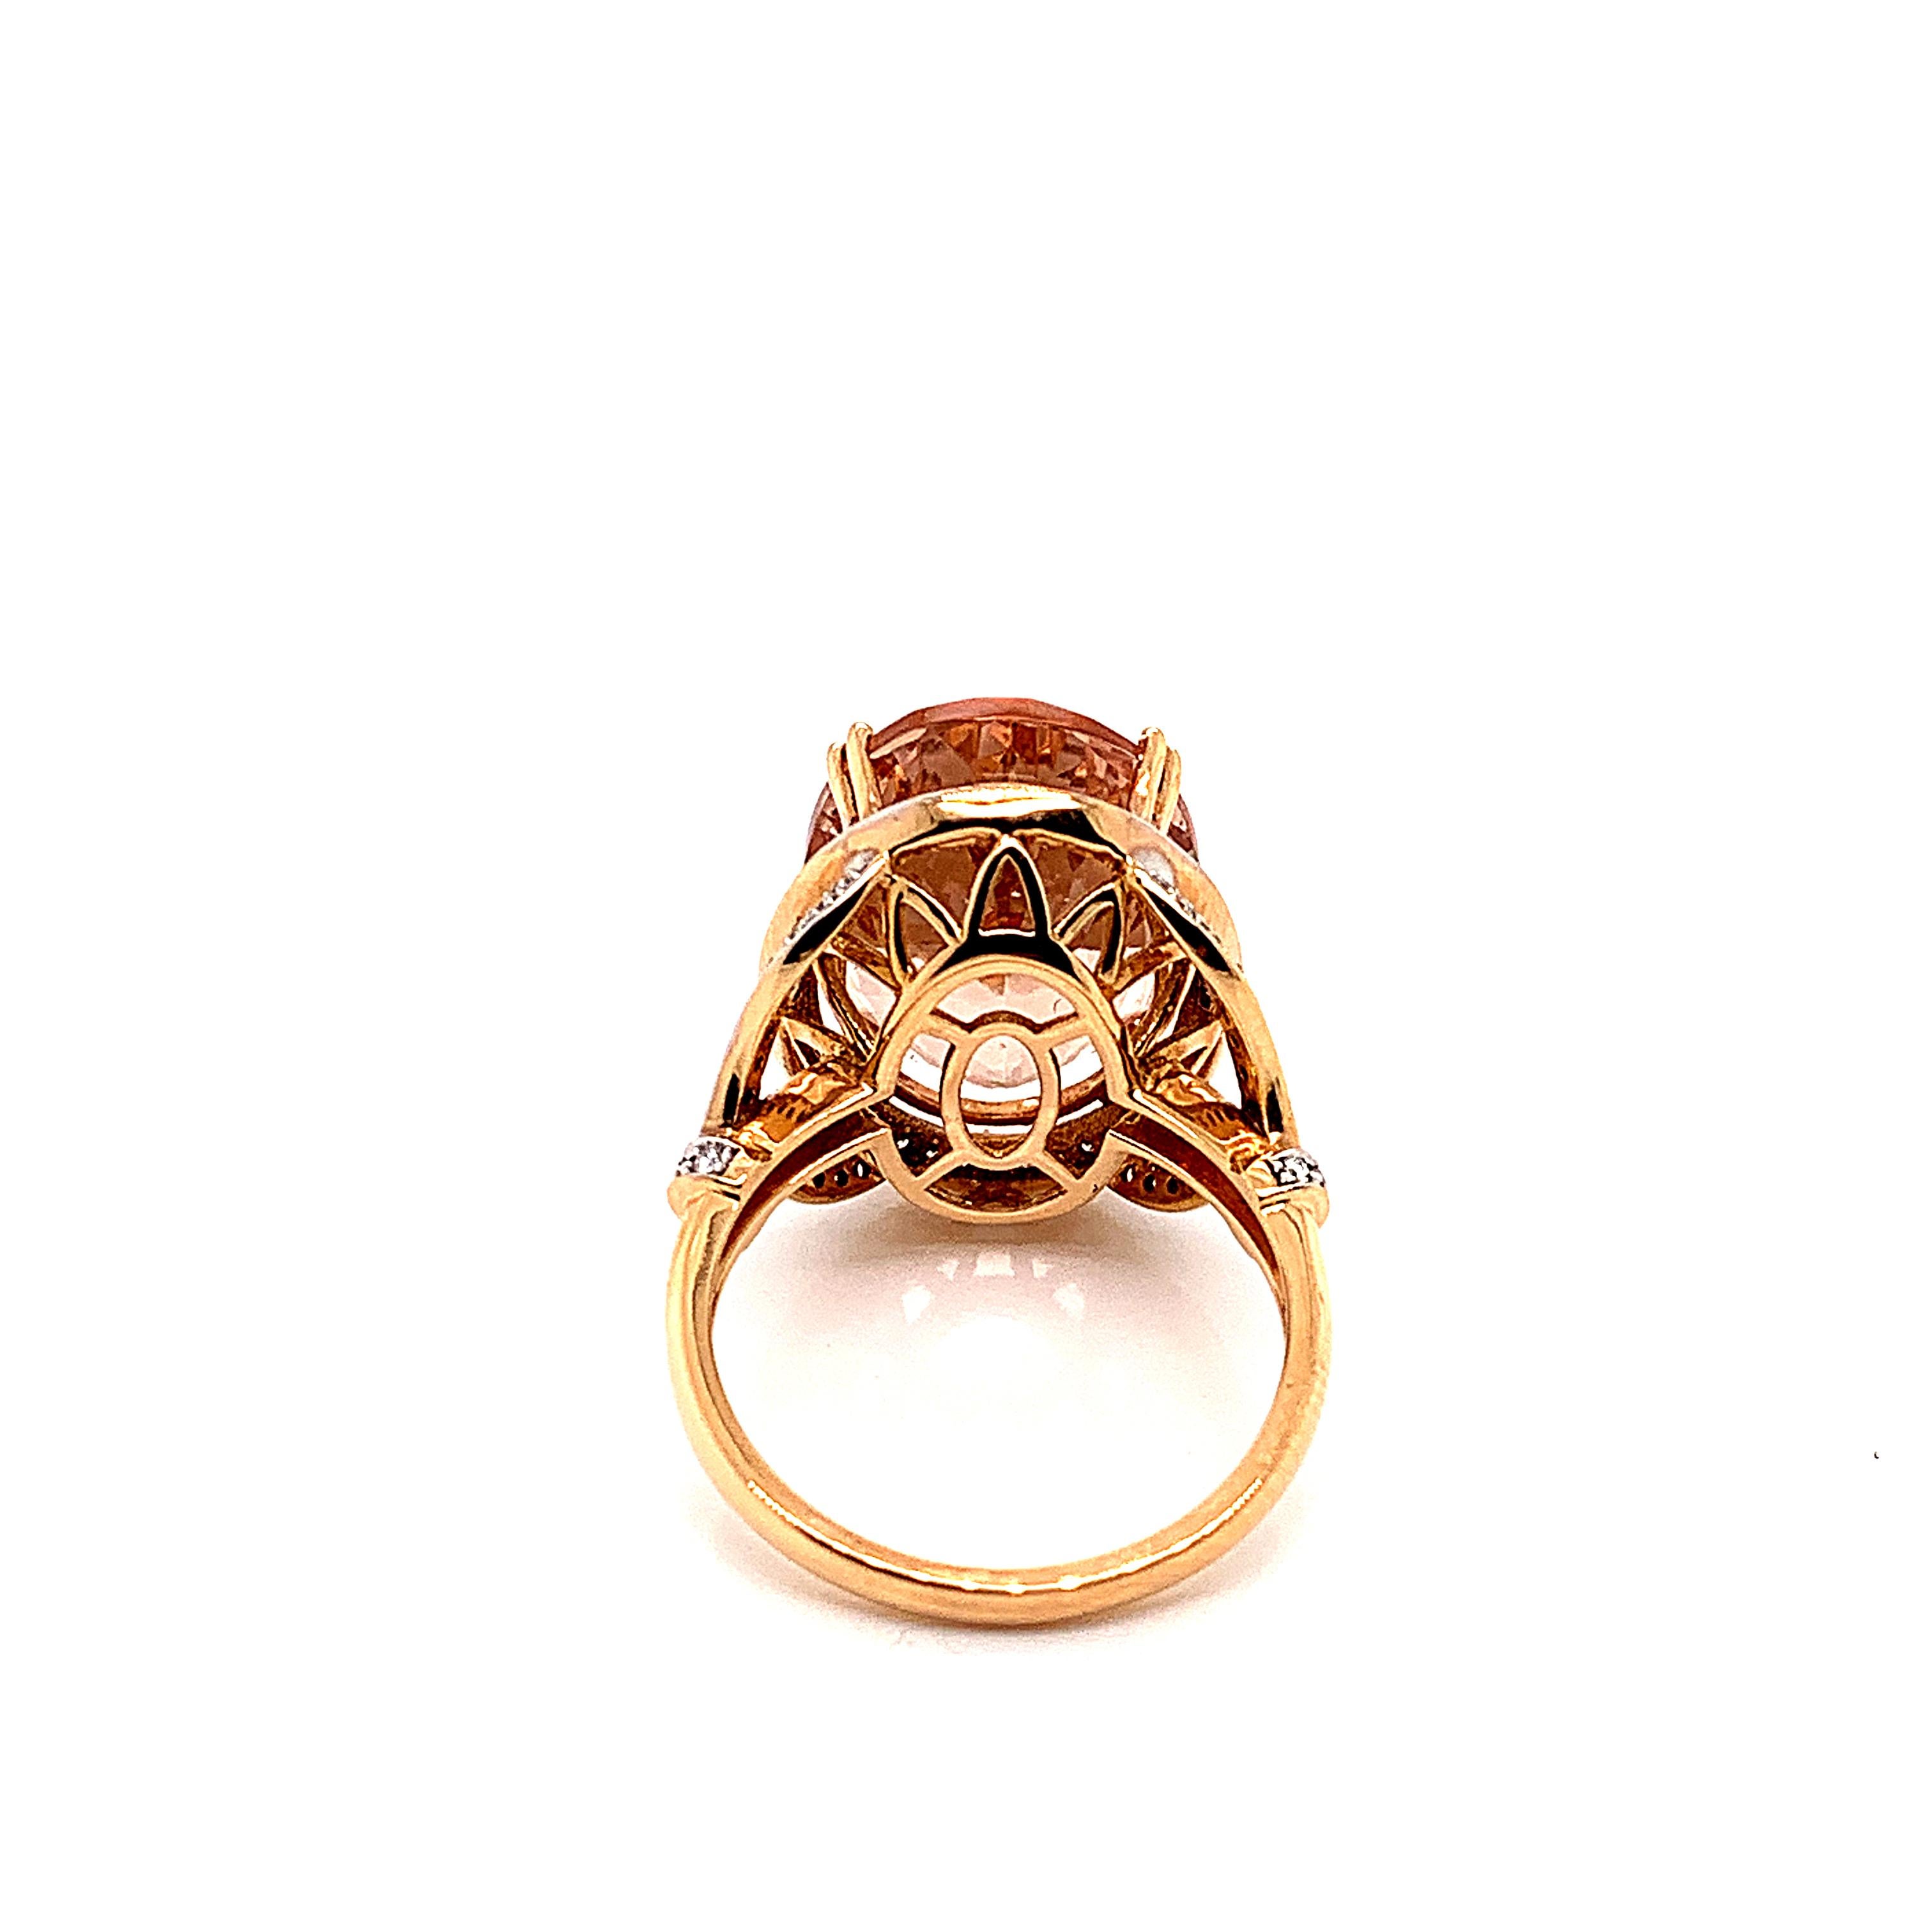 Oval Cut 11.84 Carat Oval Shaped Morganite Ring in 18 Karat Rose Gold with Diamonds For Sale